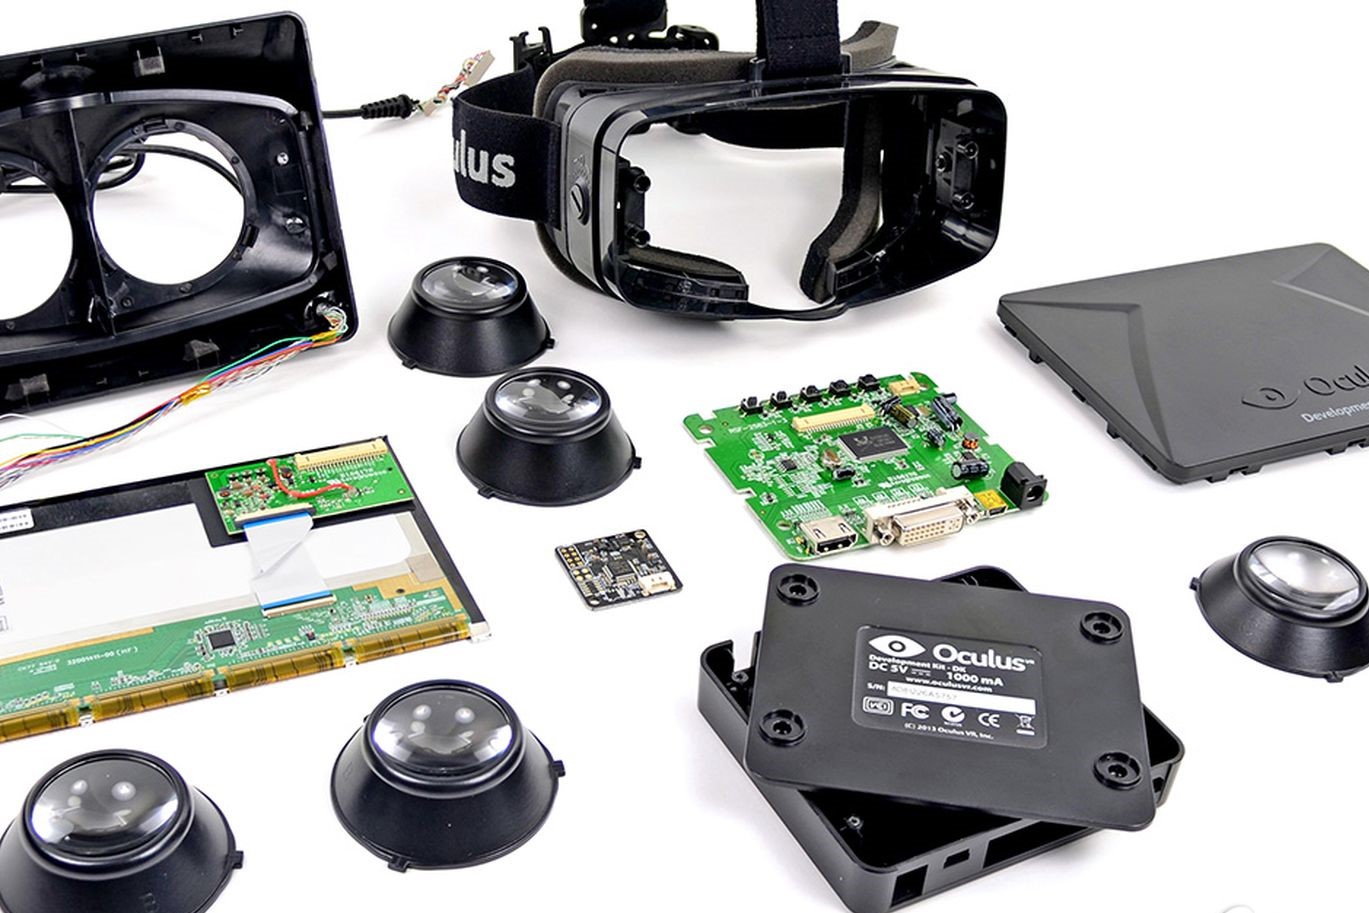 How To Disassemble Oculus Rift